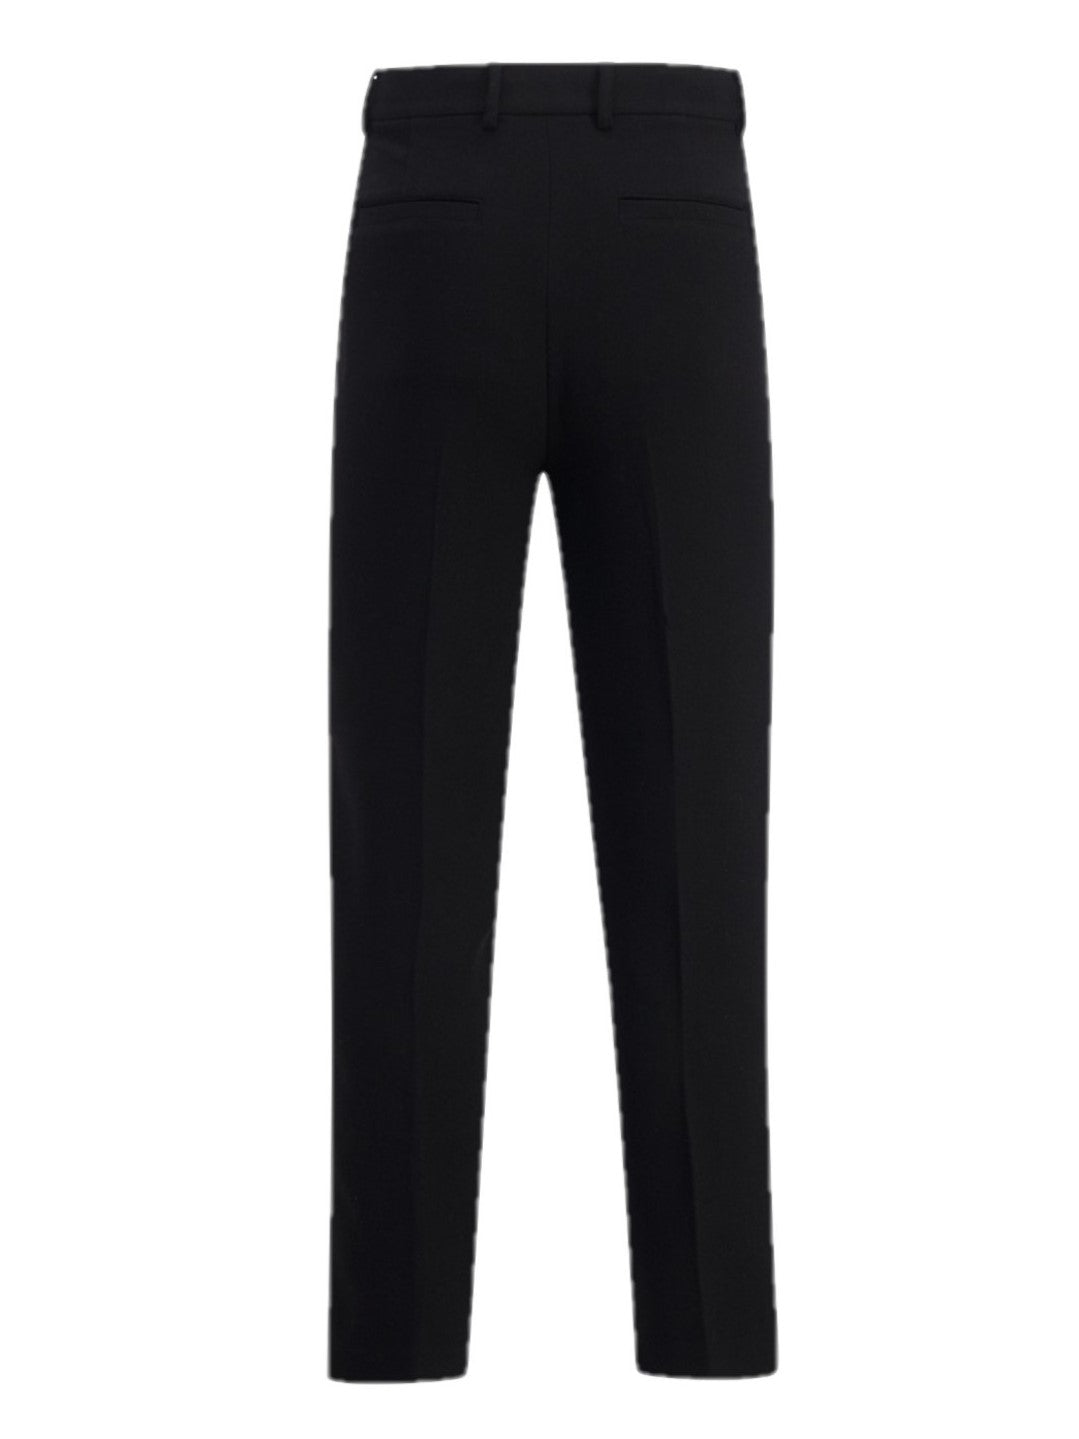 Stanley Formal Trousers